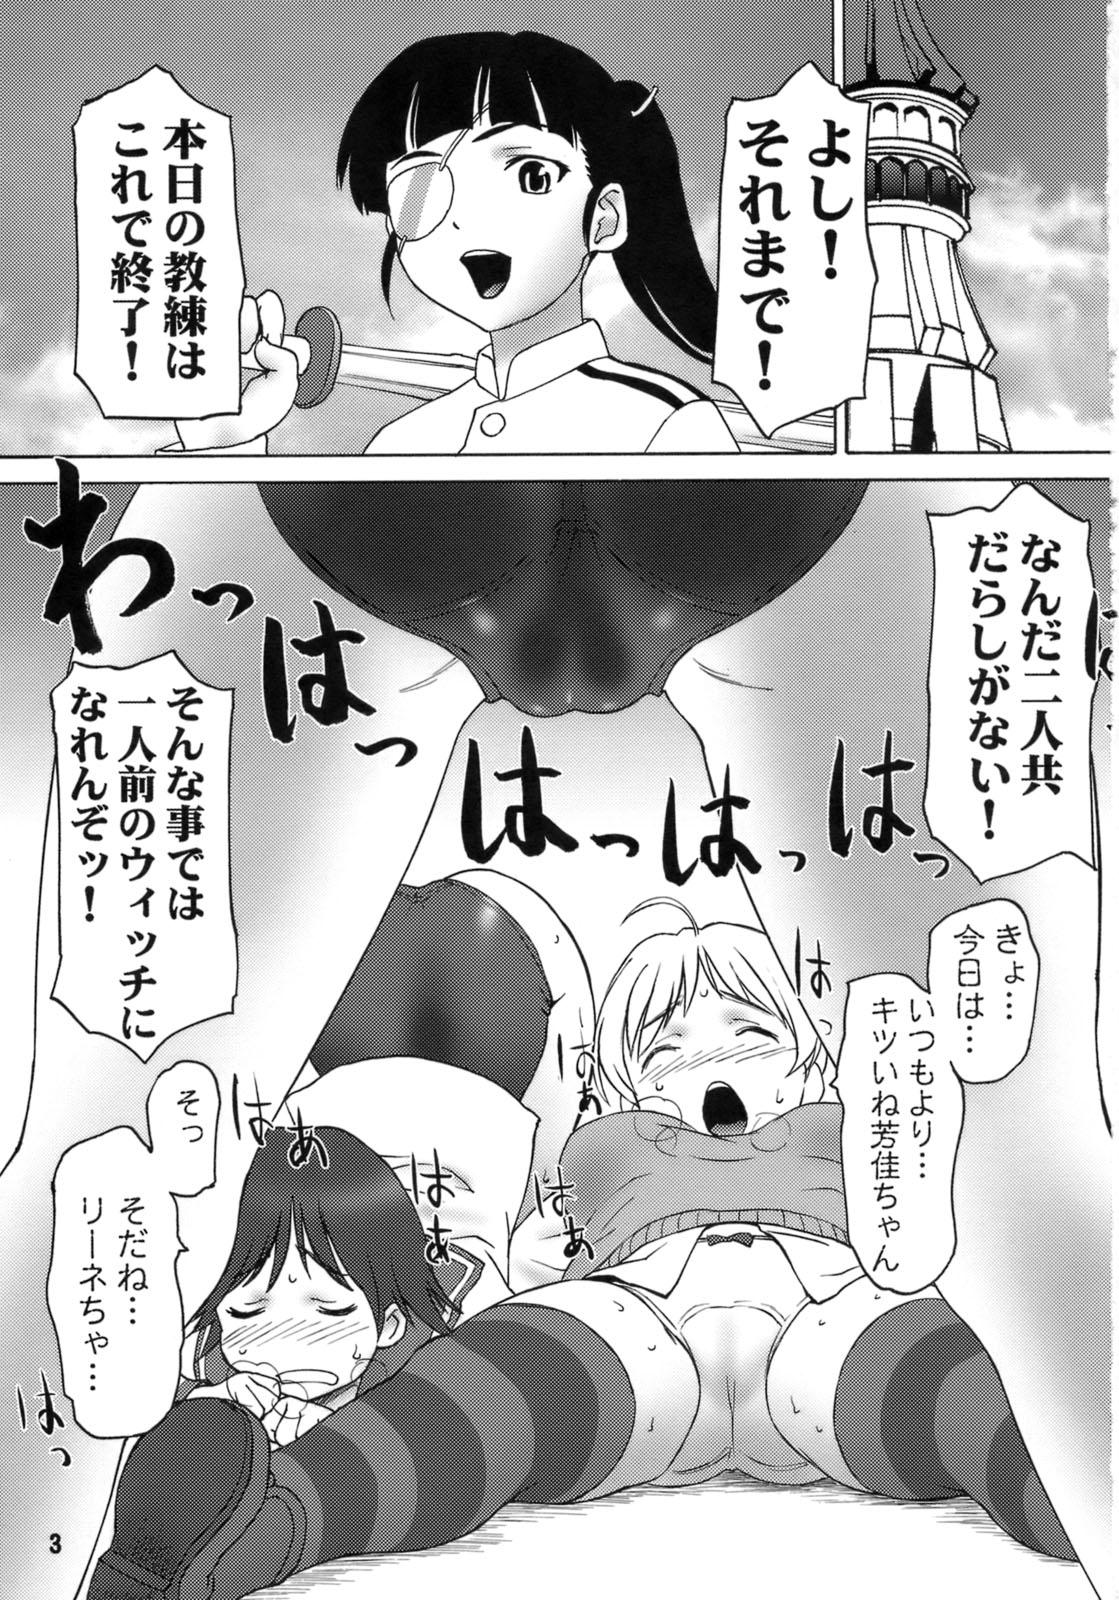 Rough Sex Steady - Strike witches Black Thugs - Page 2